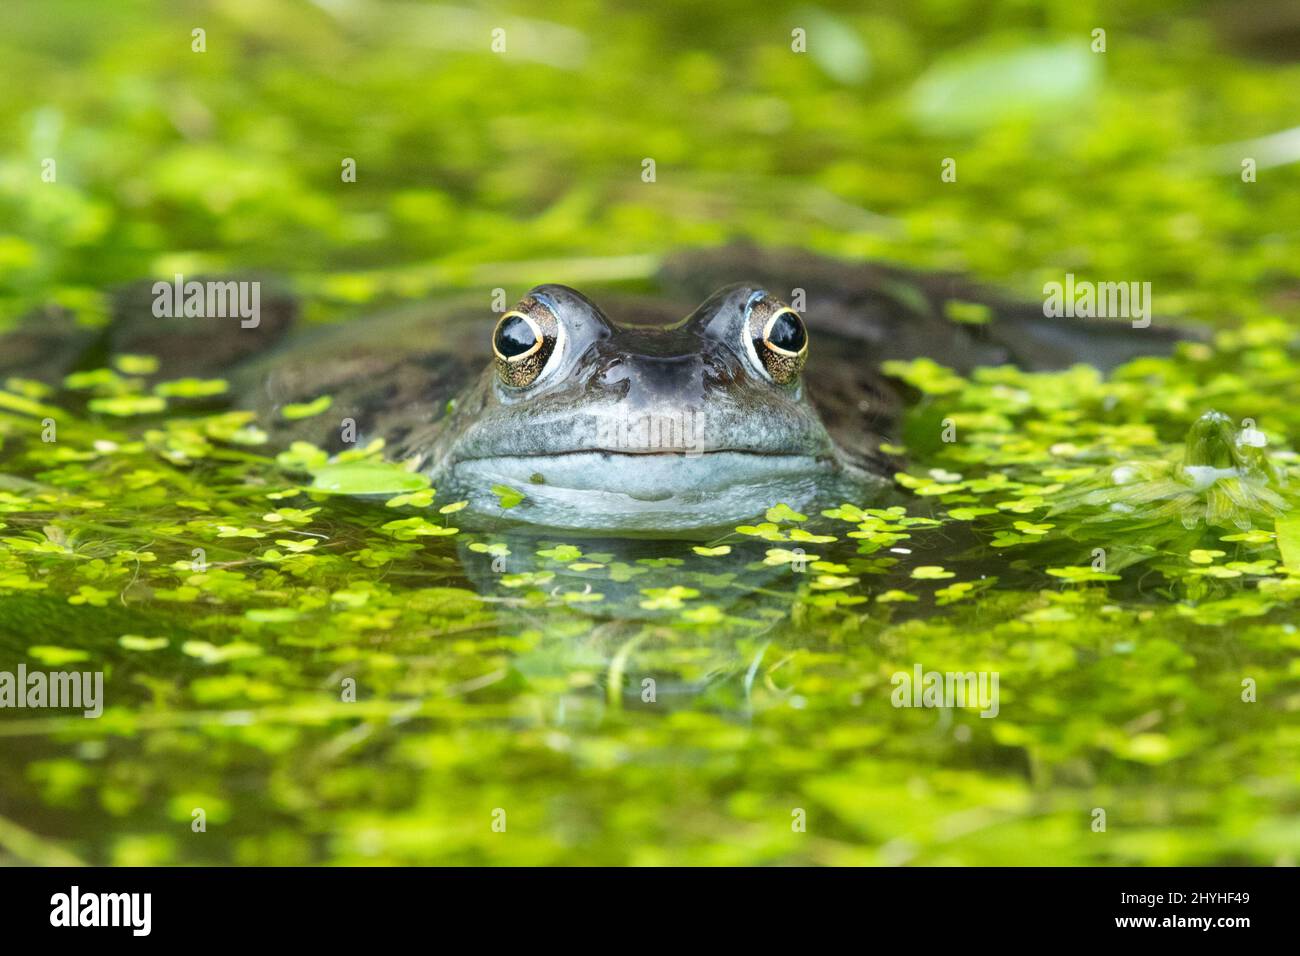 Frog - common frog - rana temporaria - surrounded by duckweed in garden pond - Scotland, UK Stock Photo